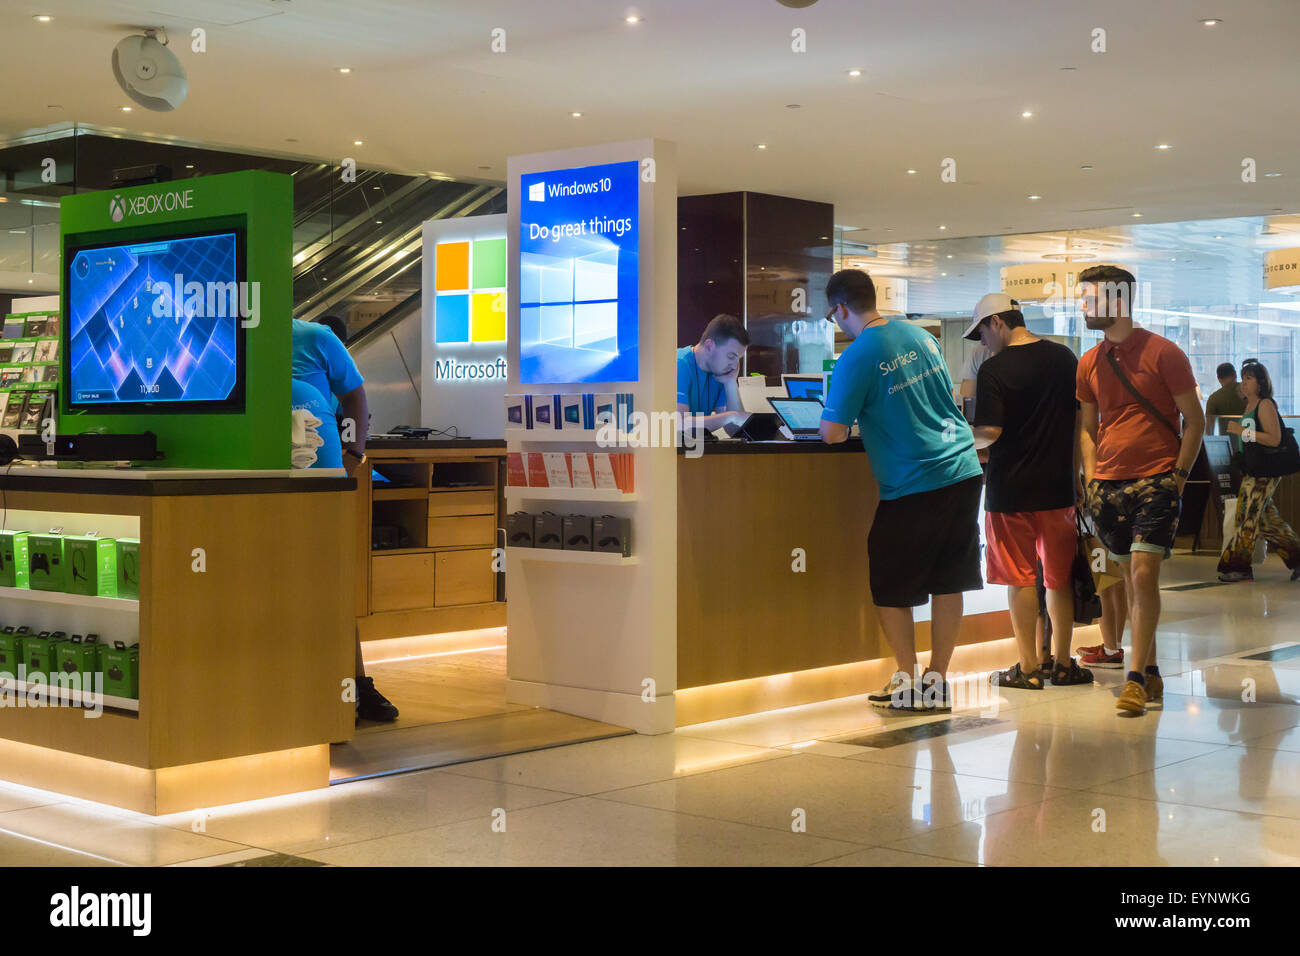 Customers try out computers at a Microsoft kiosk in the Time Warner Center in New York promoting Windows 10 and other products, seen on Thursday, July 30, 2015. Windows 10 was released as a free upgrade with minimal hoopla yesterday. (© Richard B. Levine) Stock Photo